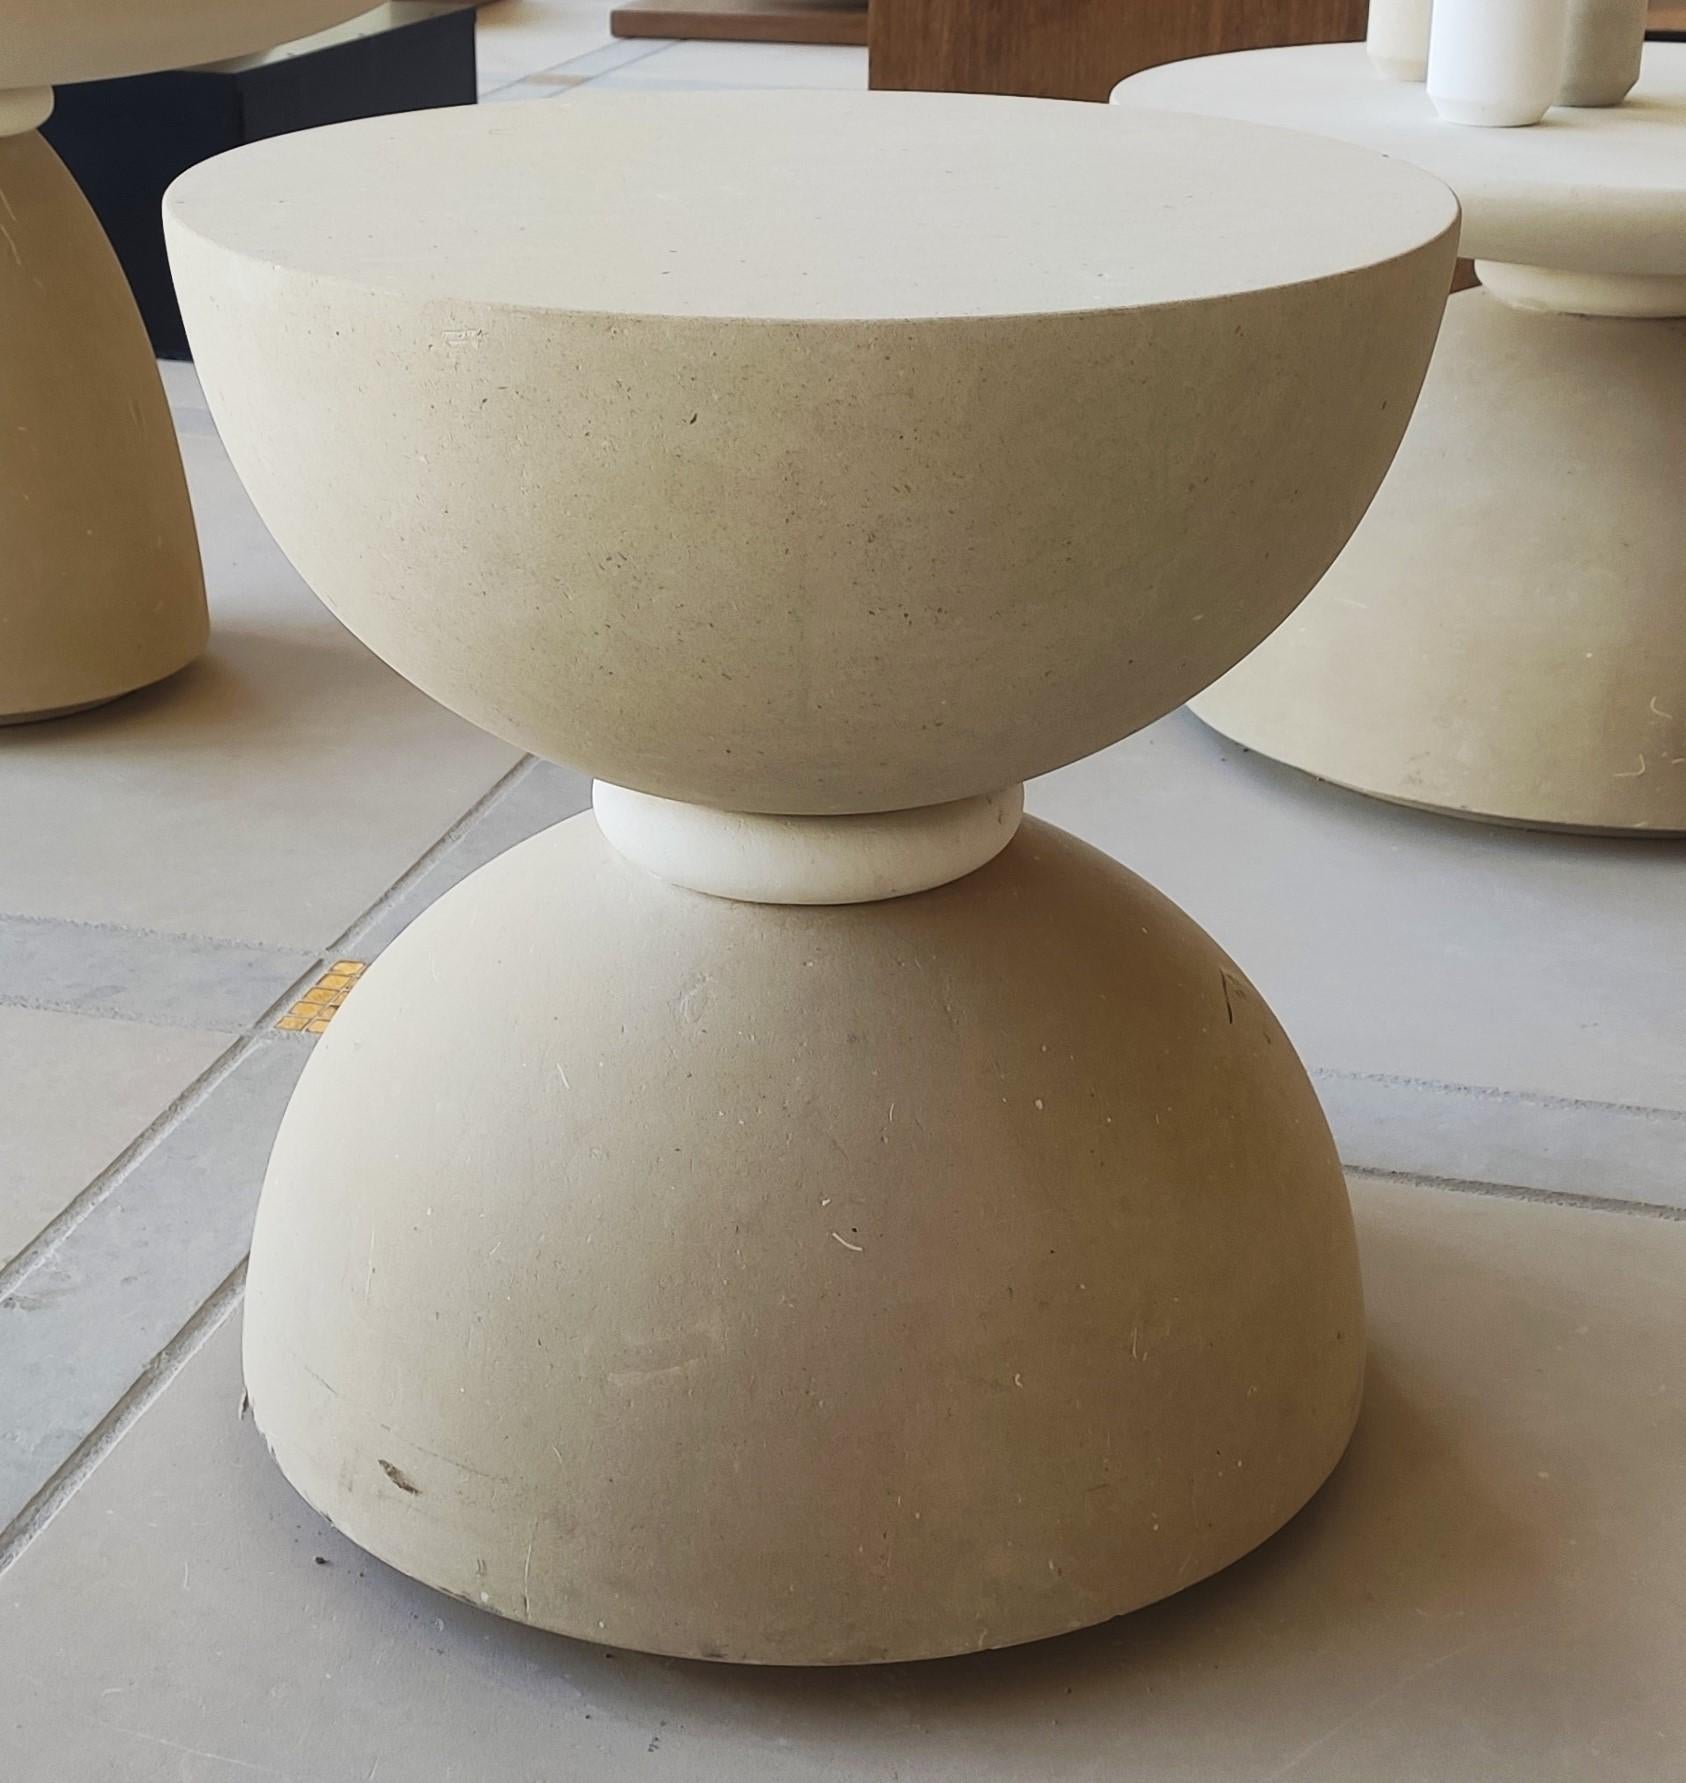 DELIVERY TO US AND CANADA INCLUDED 
GEO line is envisioned as a praise of Pimar stone, a timeless material. Stone offers itself through the emotional value of smooth and silky surfaces. The sculptural tables are generated by geometric shapes, in a